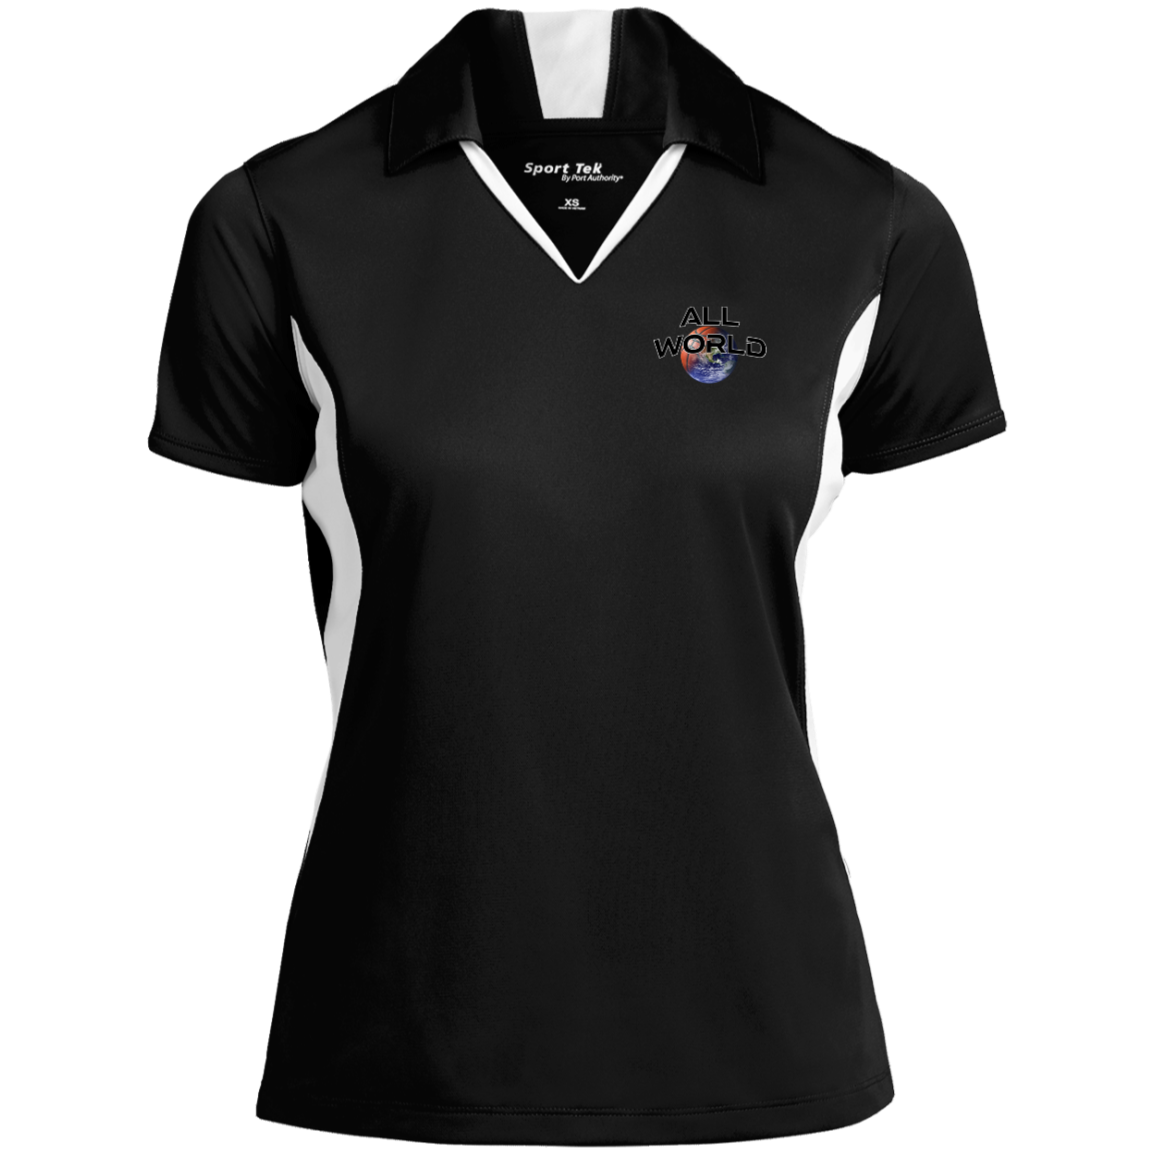 All World Ladies' Performance Polo